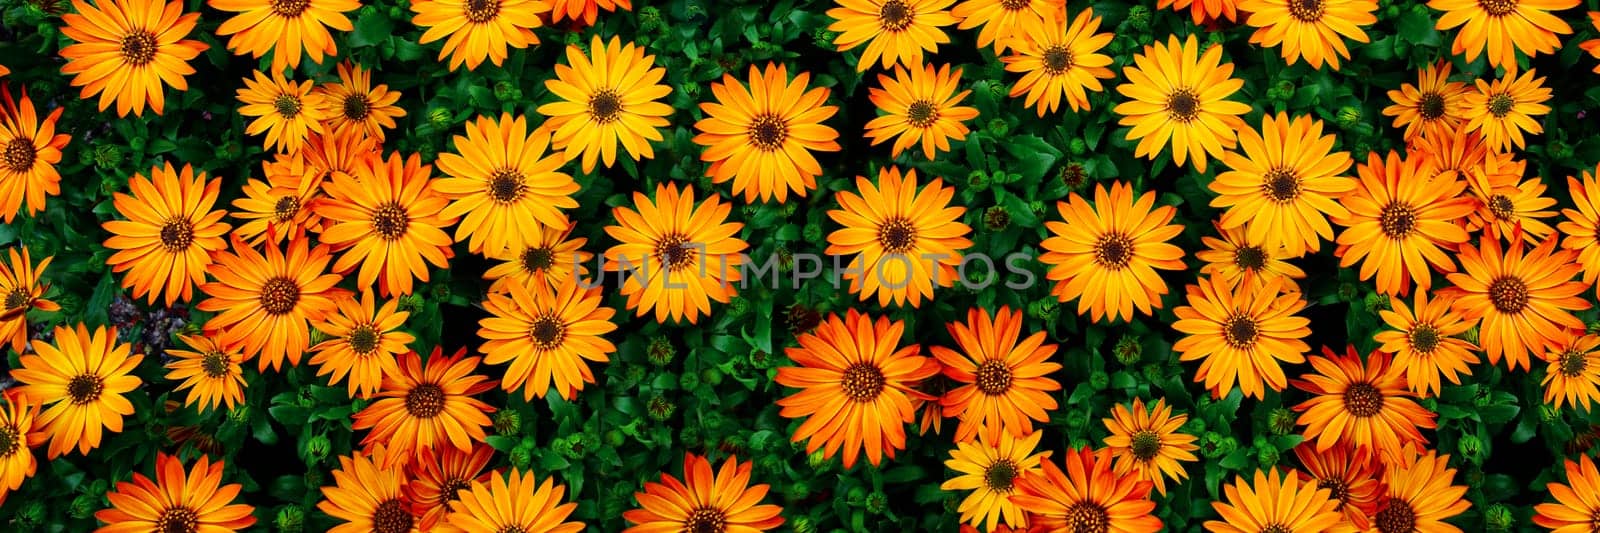 Cape marguerites orange blossom flowers in spring. African daisies by PhotoTime